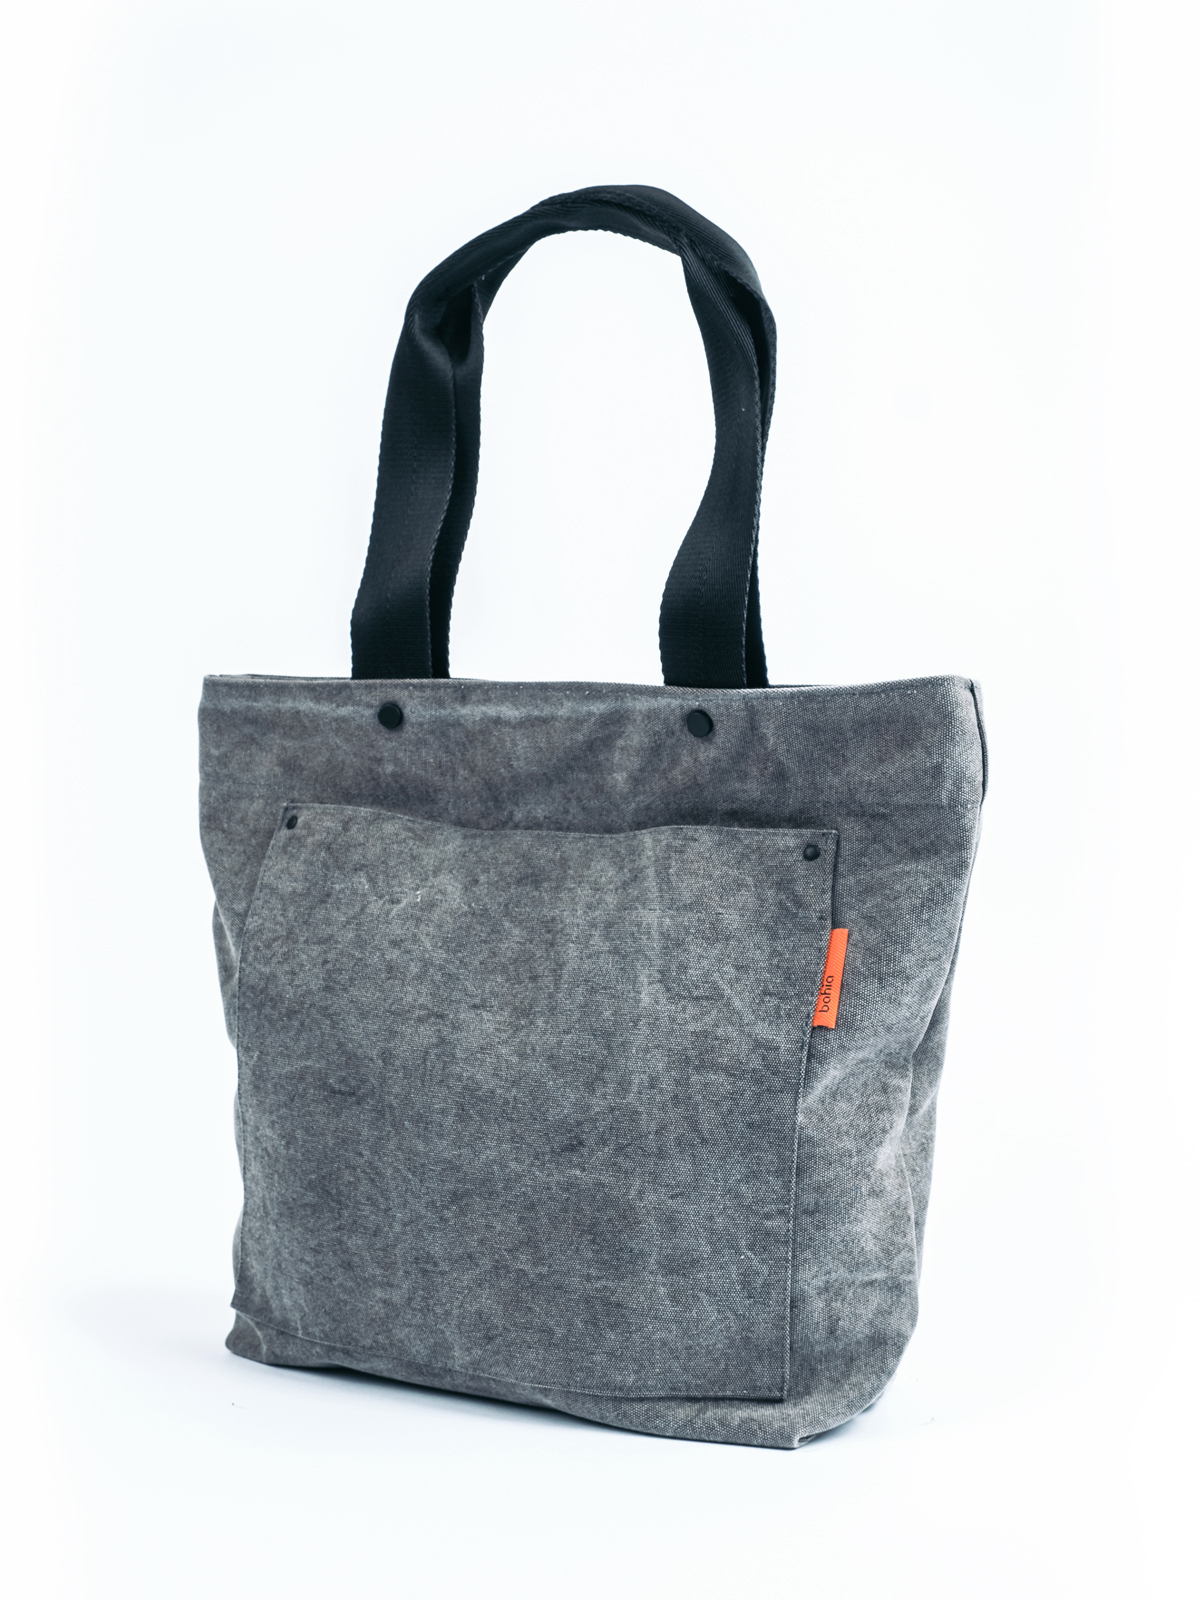 Green recycled bag with pocket - Bahíabags